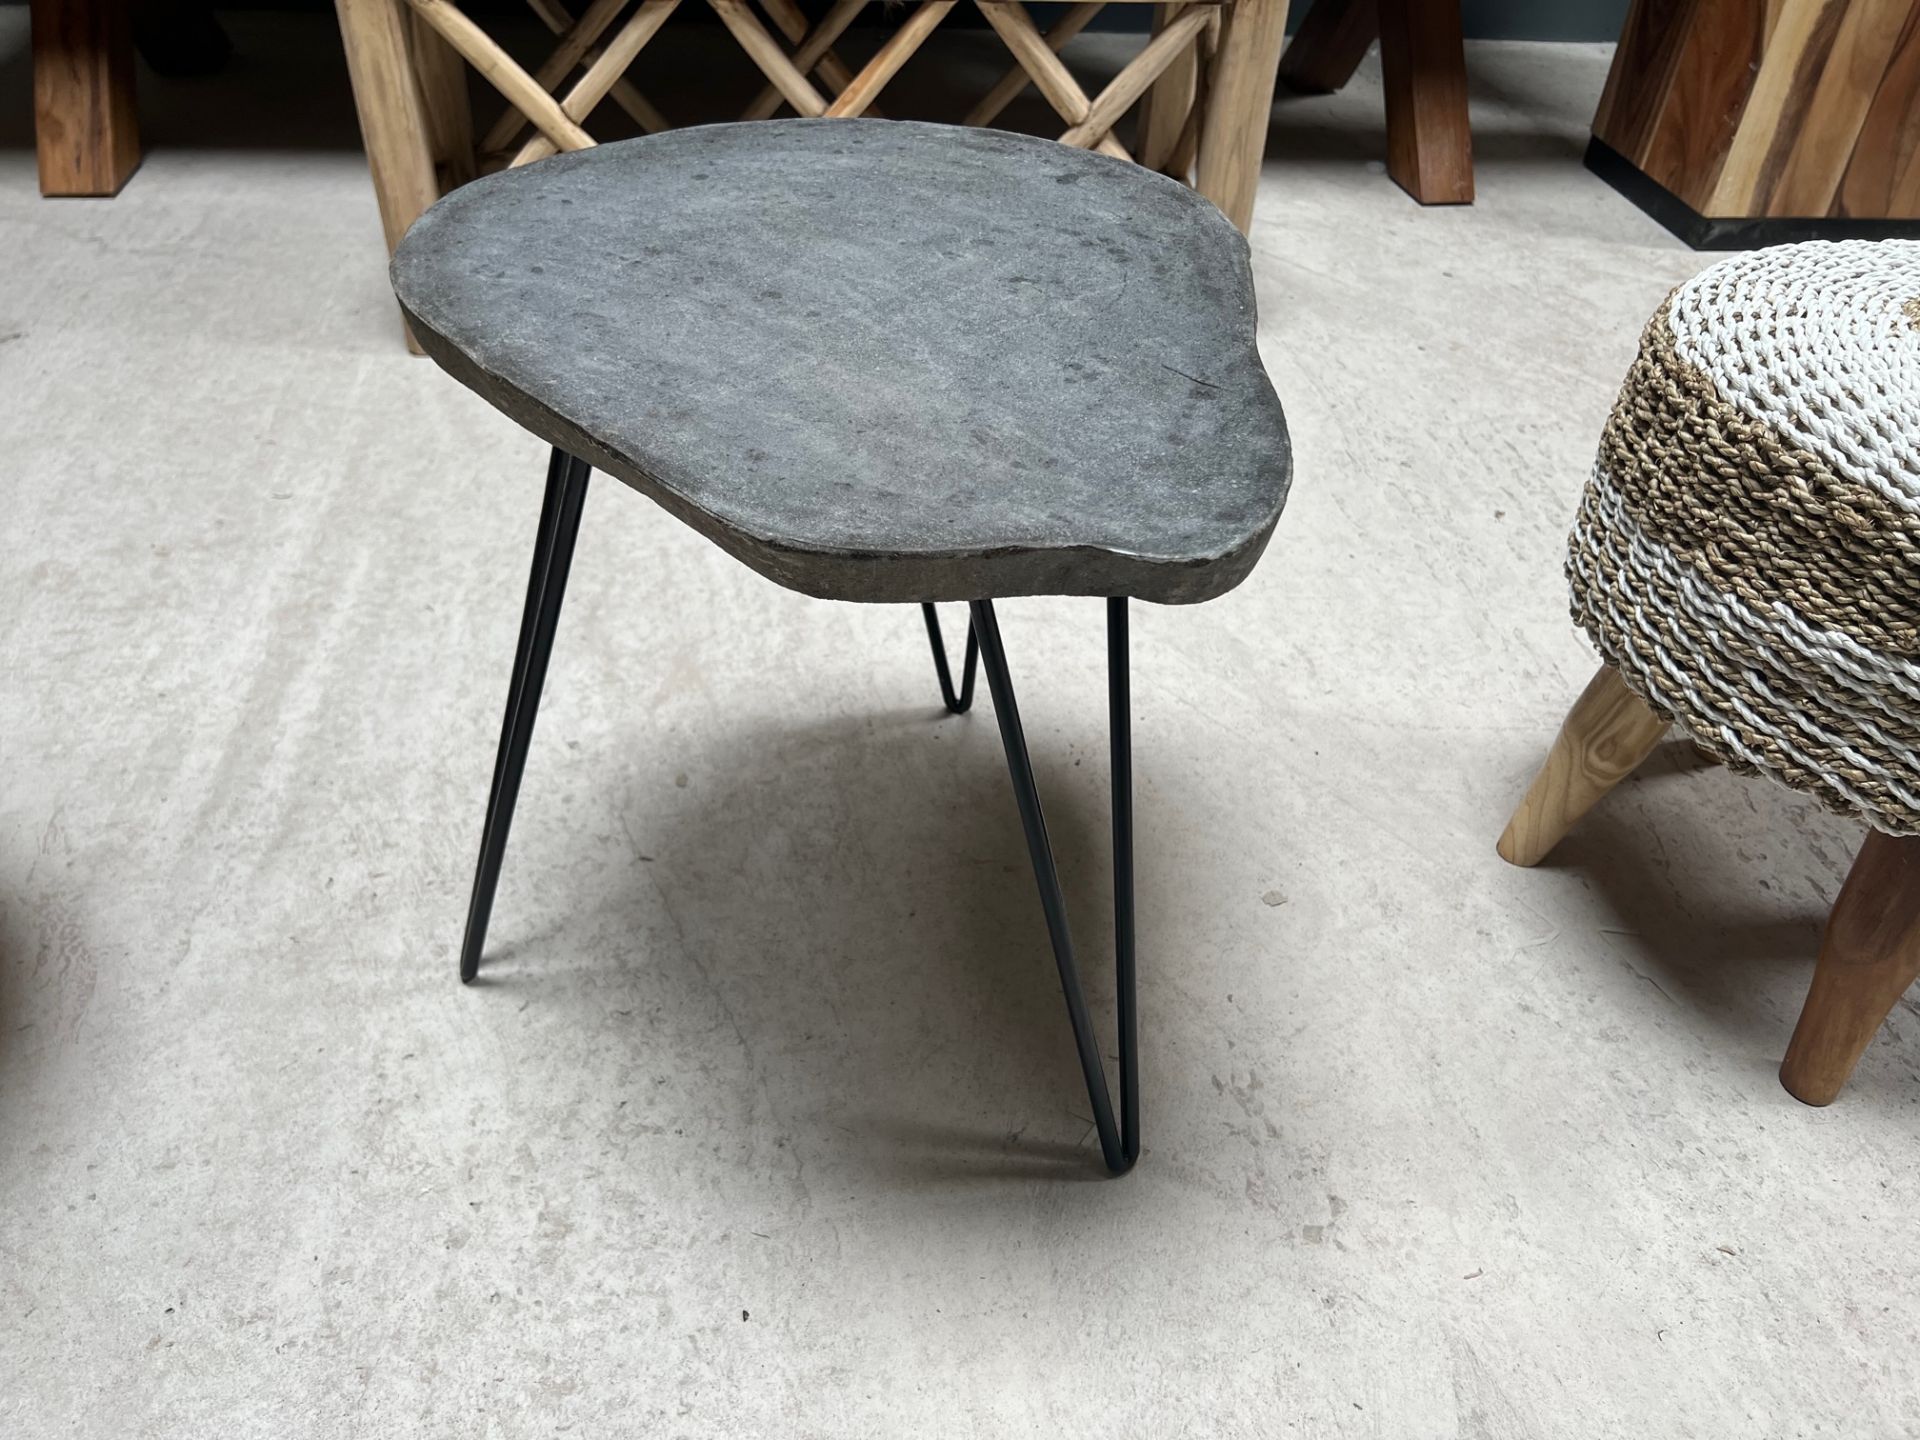 HEAVY STONE TABLE ON INDUSTRIAL LEGS - Image 2 of 3